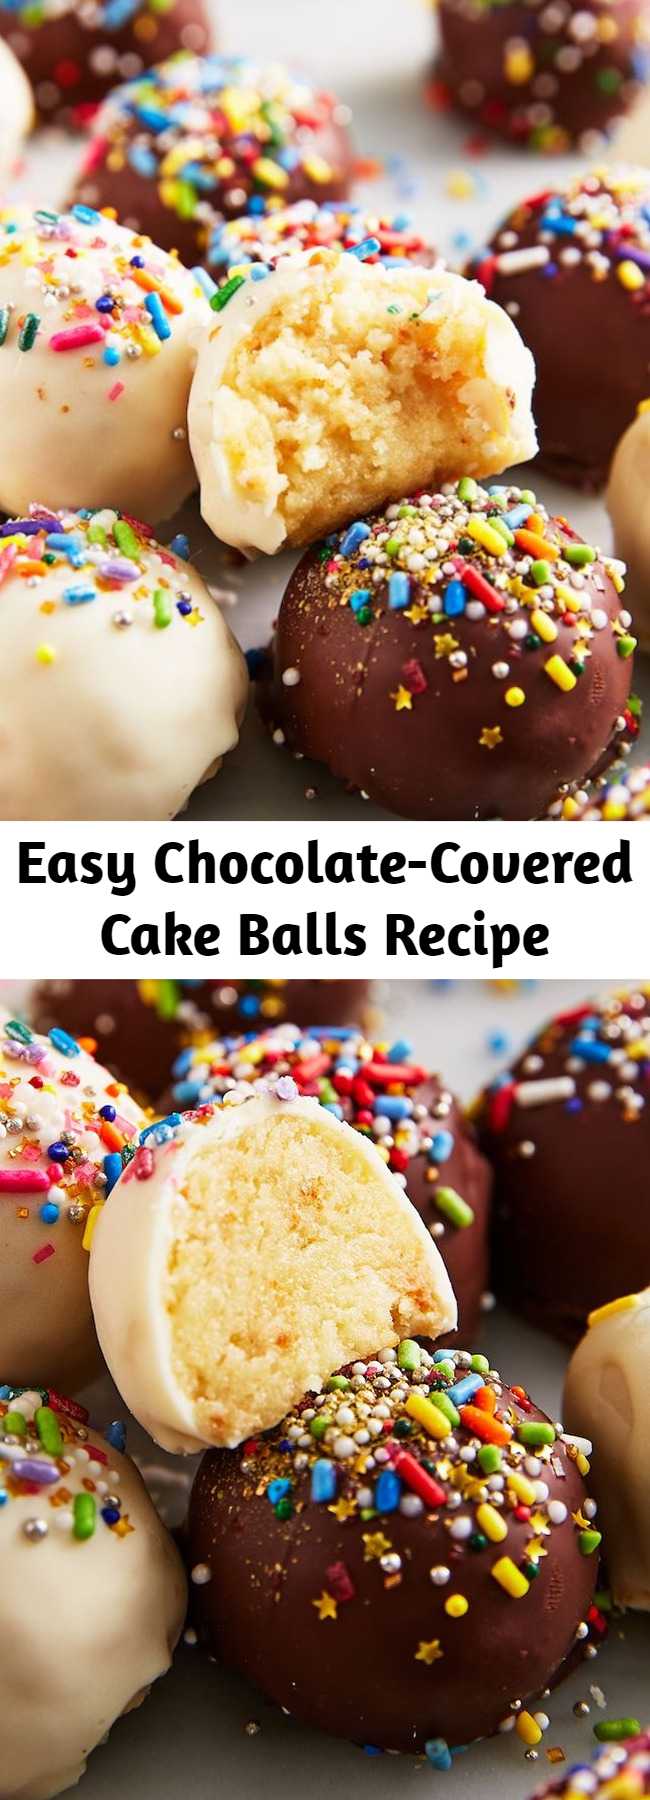 Easy Chocolate-Covered Cake Balls Recipe - You can use any type of cake for this recipe. But truthfully, we like starting with boxed mix. With the homemade buttercream, chocolate coating, and festive sprinkles, no one will notice or care.